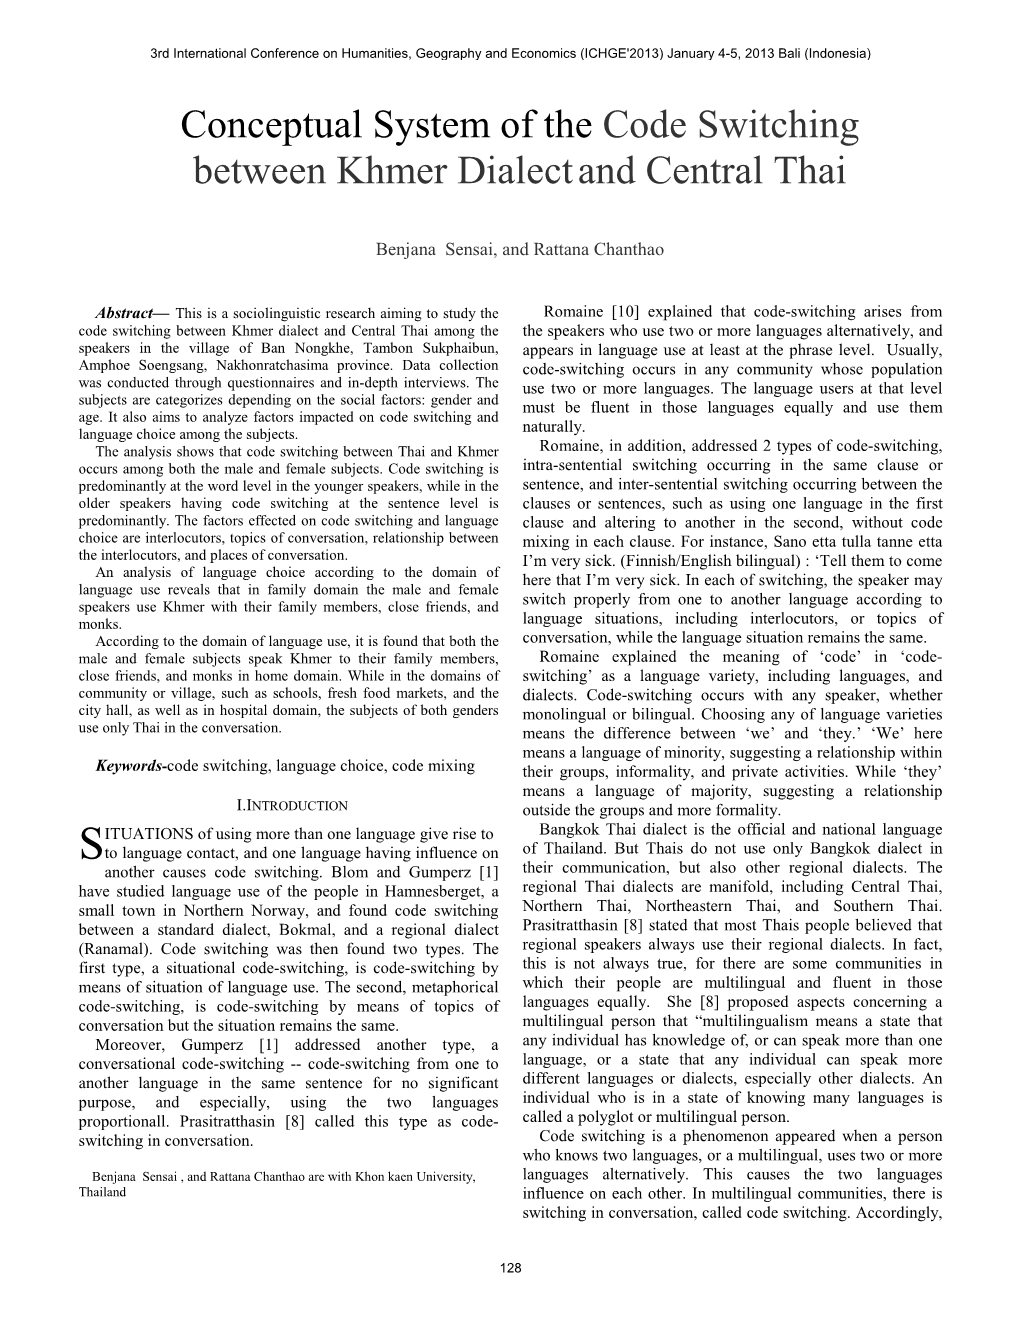 Conceptual System of the Code Switching Between Khmer Dialect and Central Thai